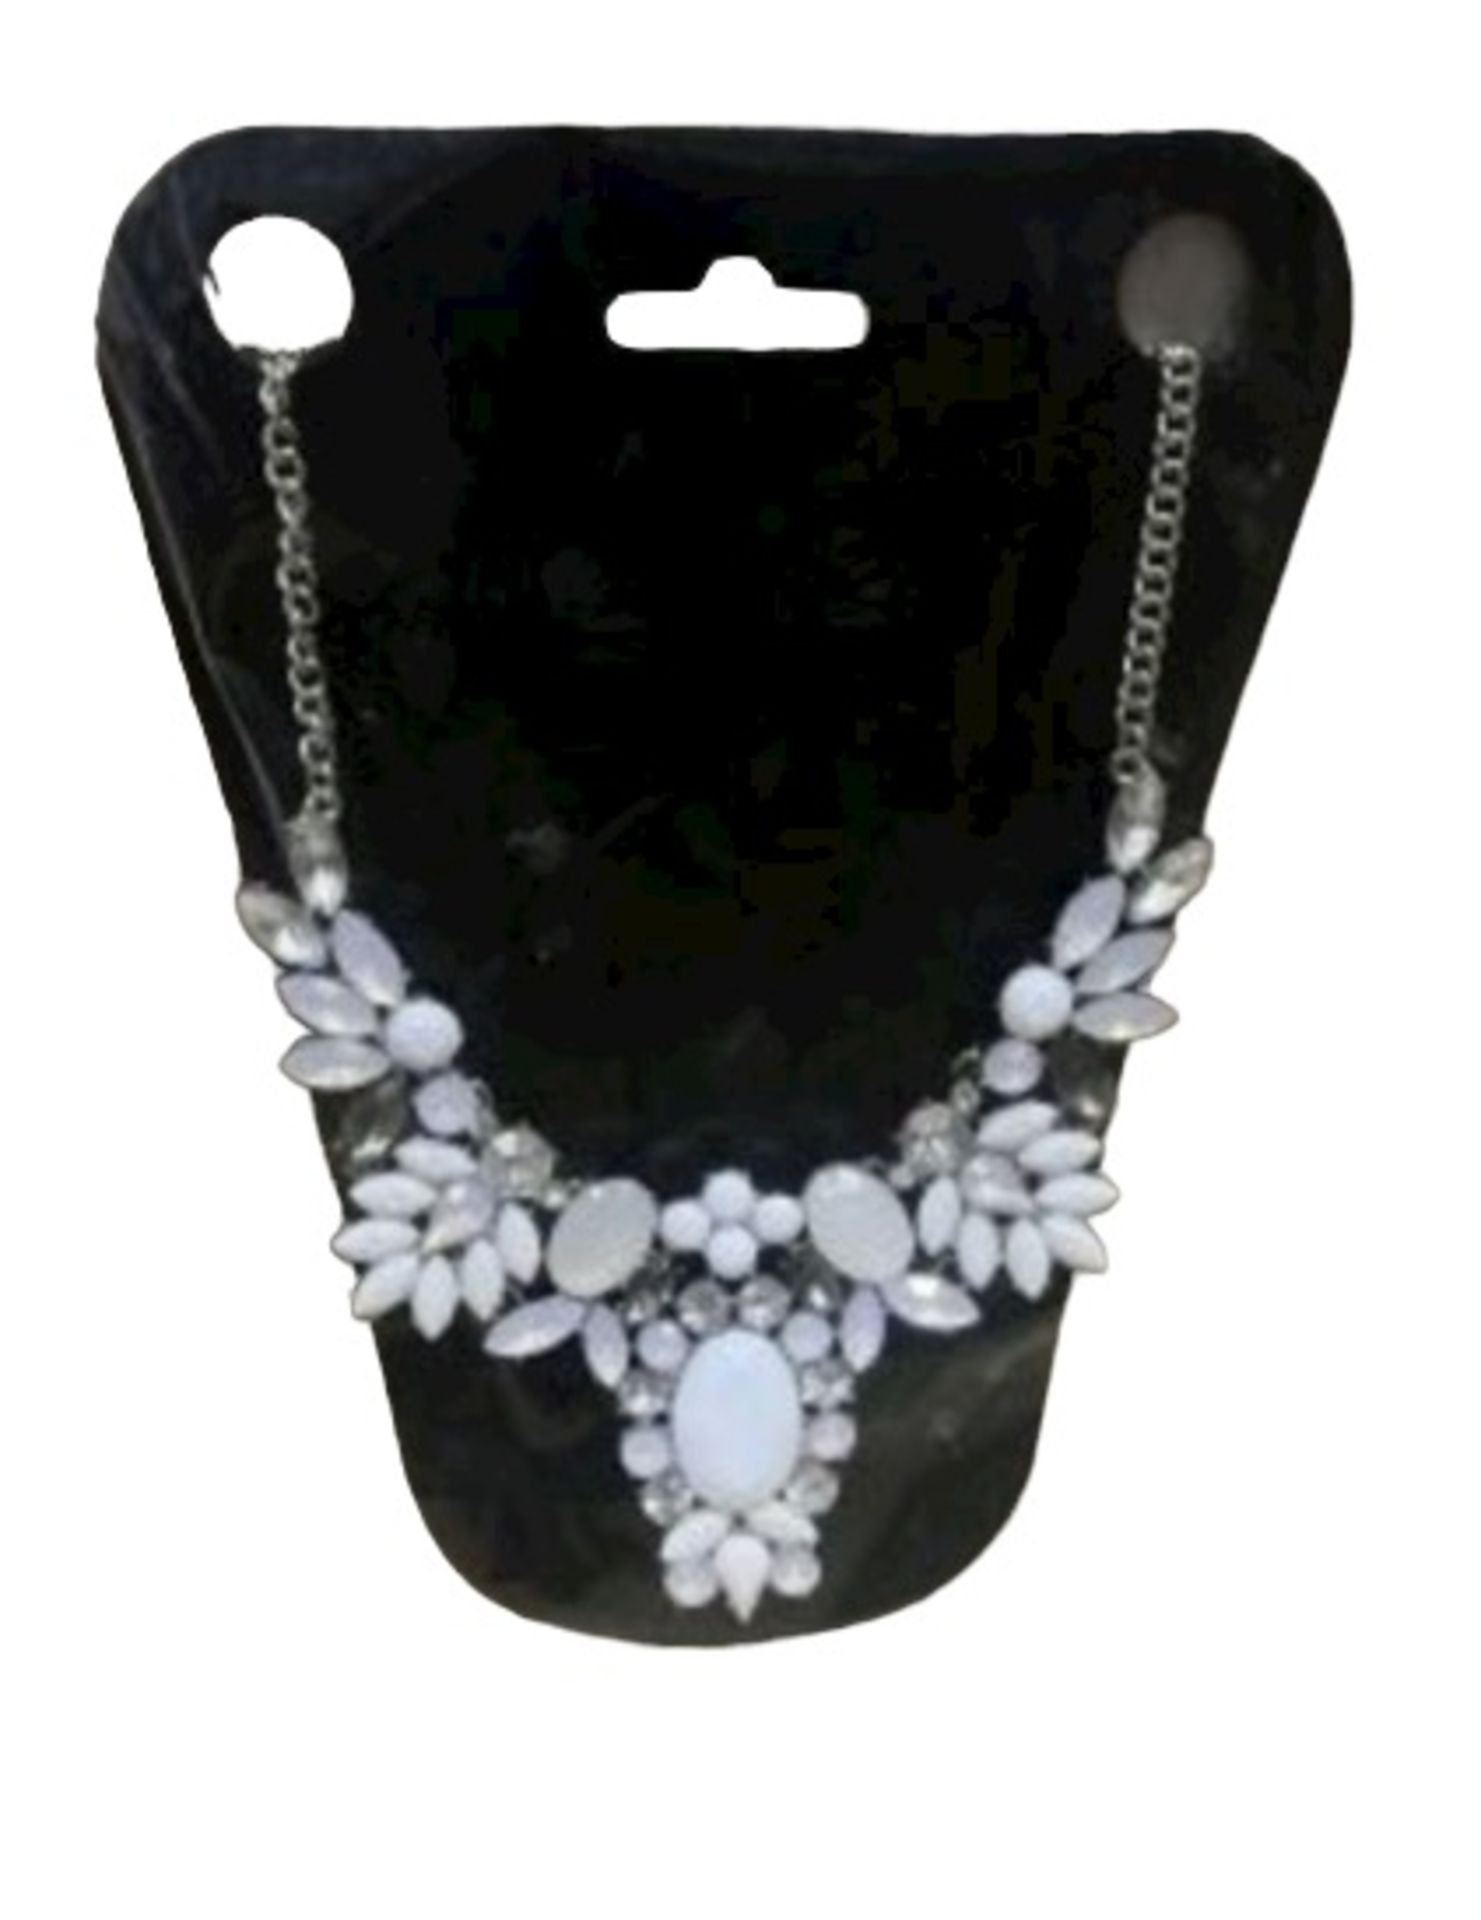 25 x Individually Packaged Statement Necklaces RRP £14.99 ea